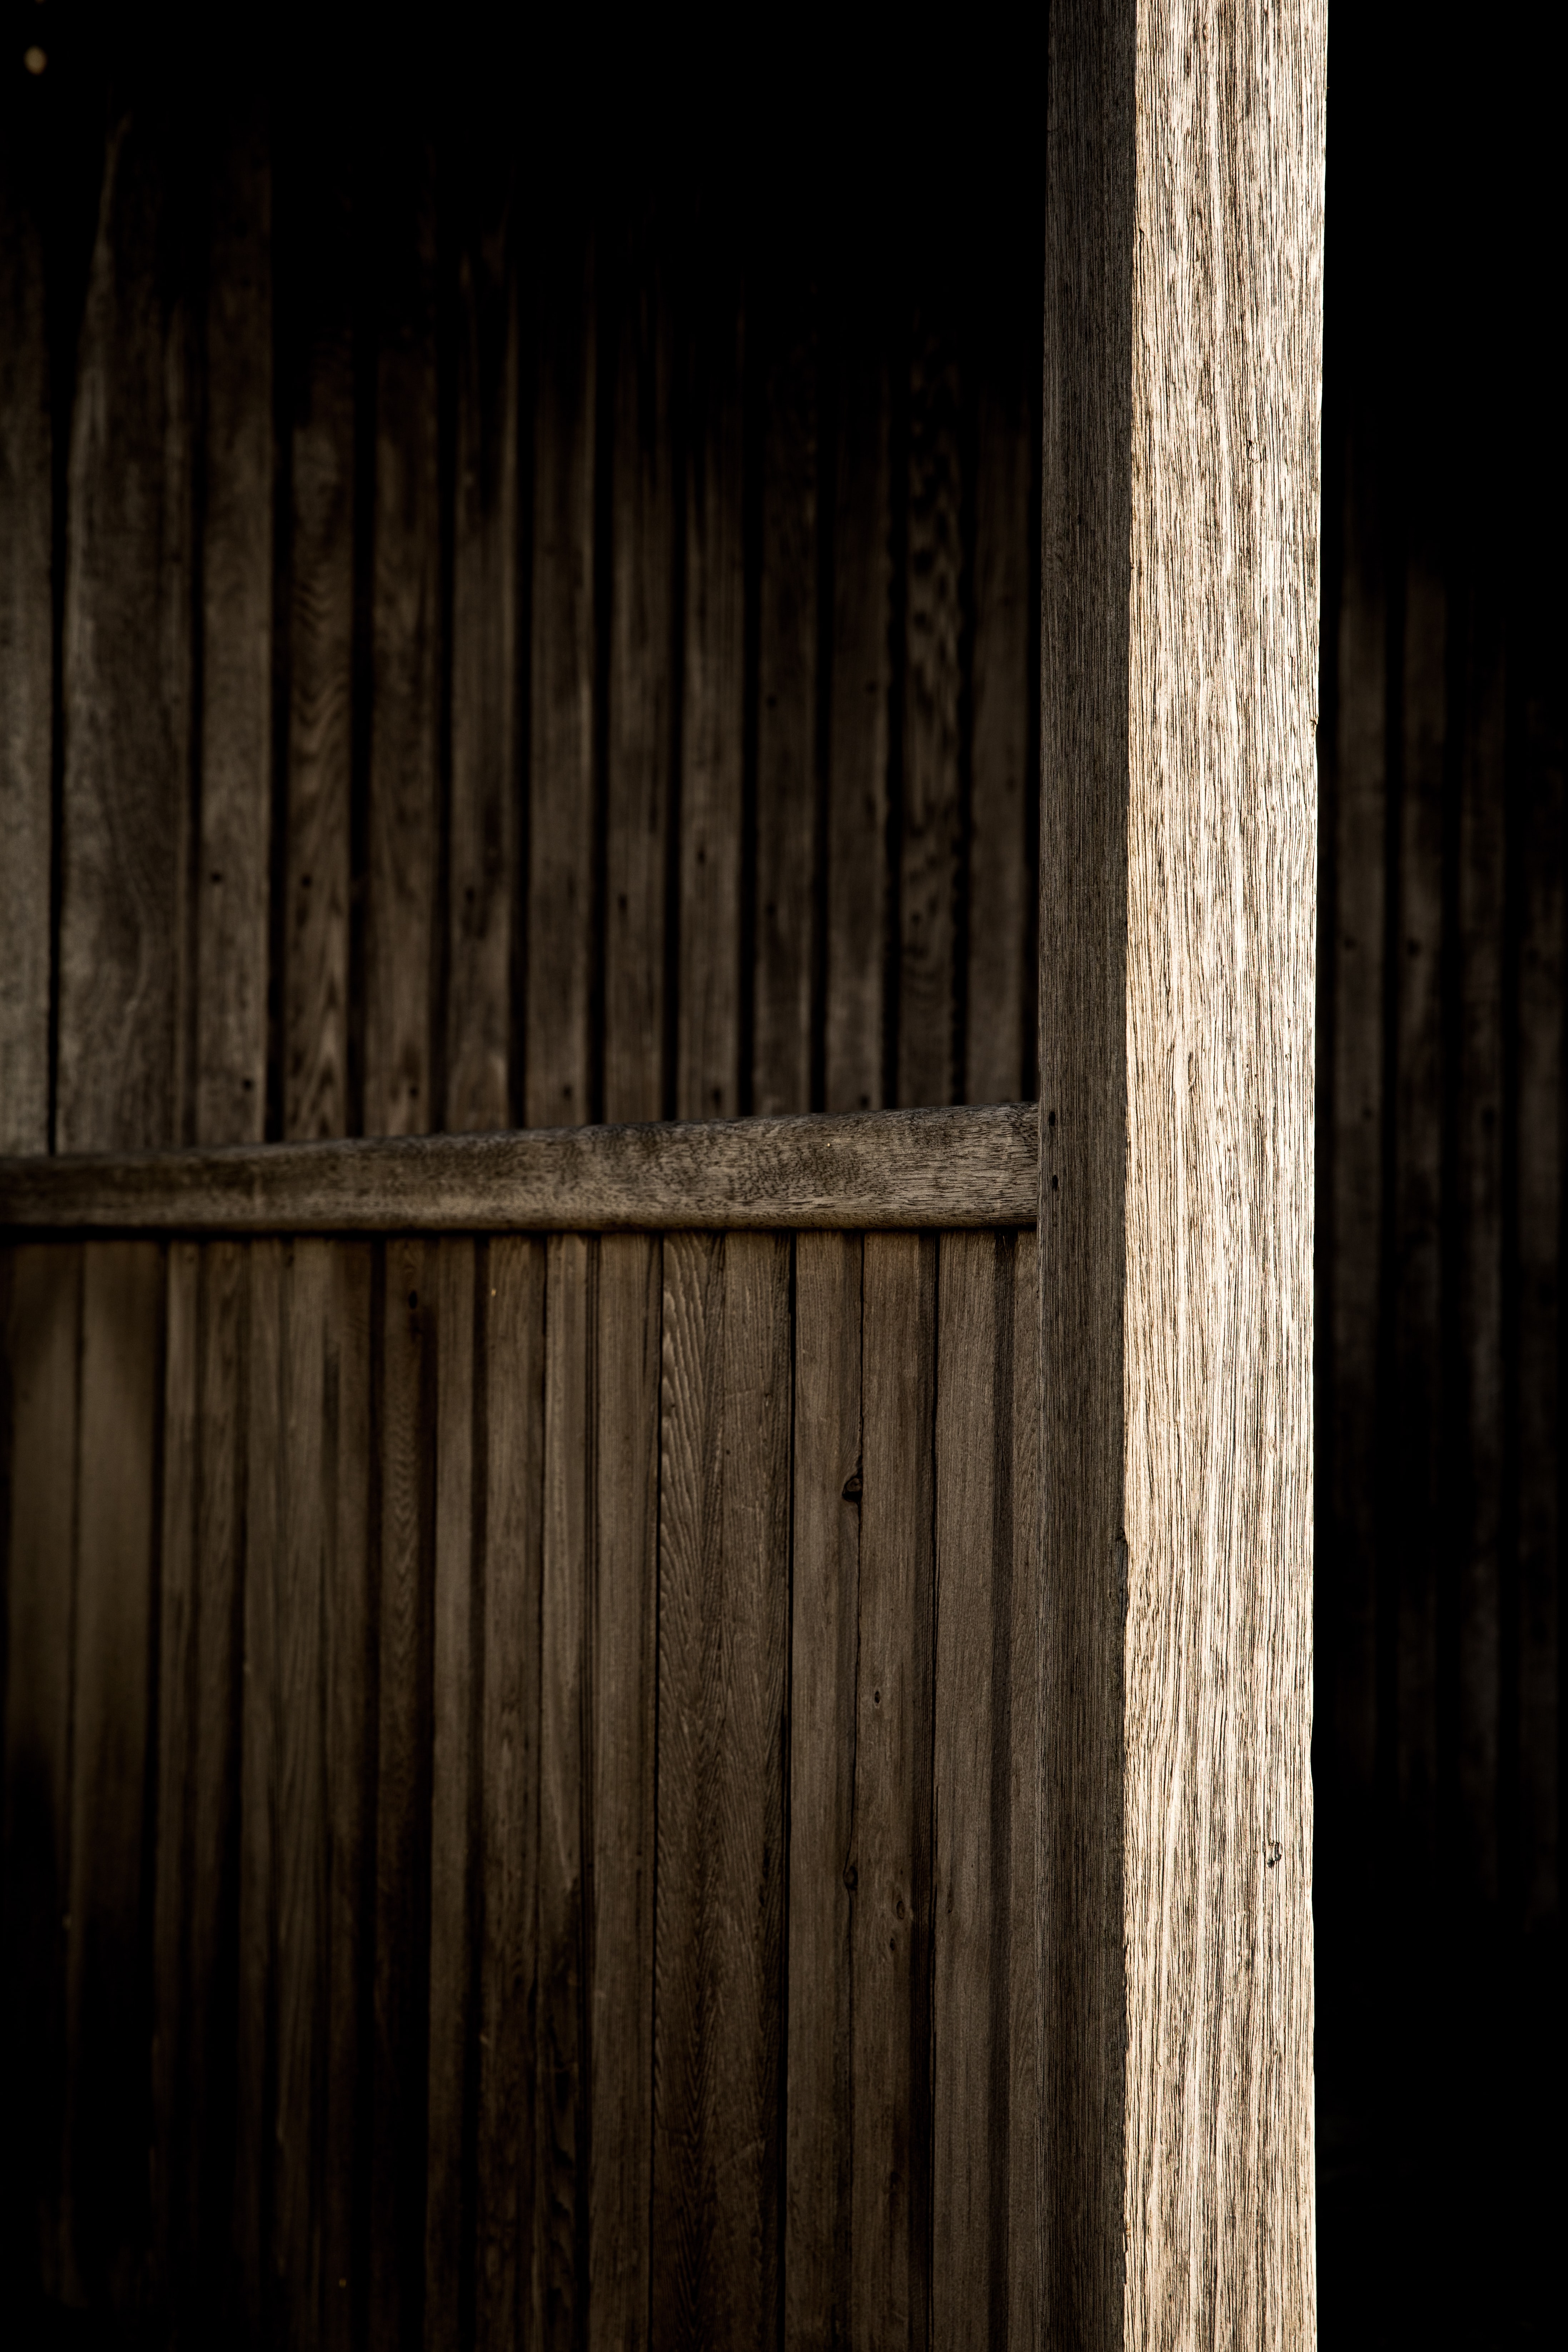 android textures, wood, wooden, tree, texture, planks, board